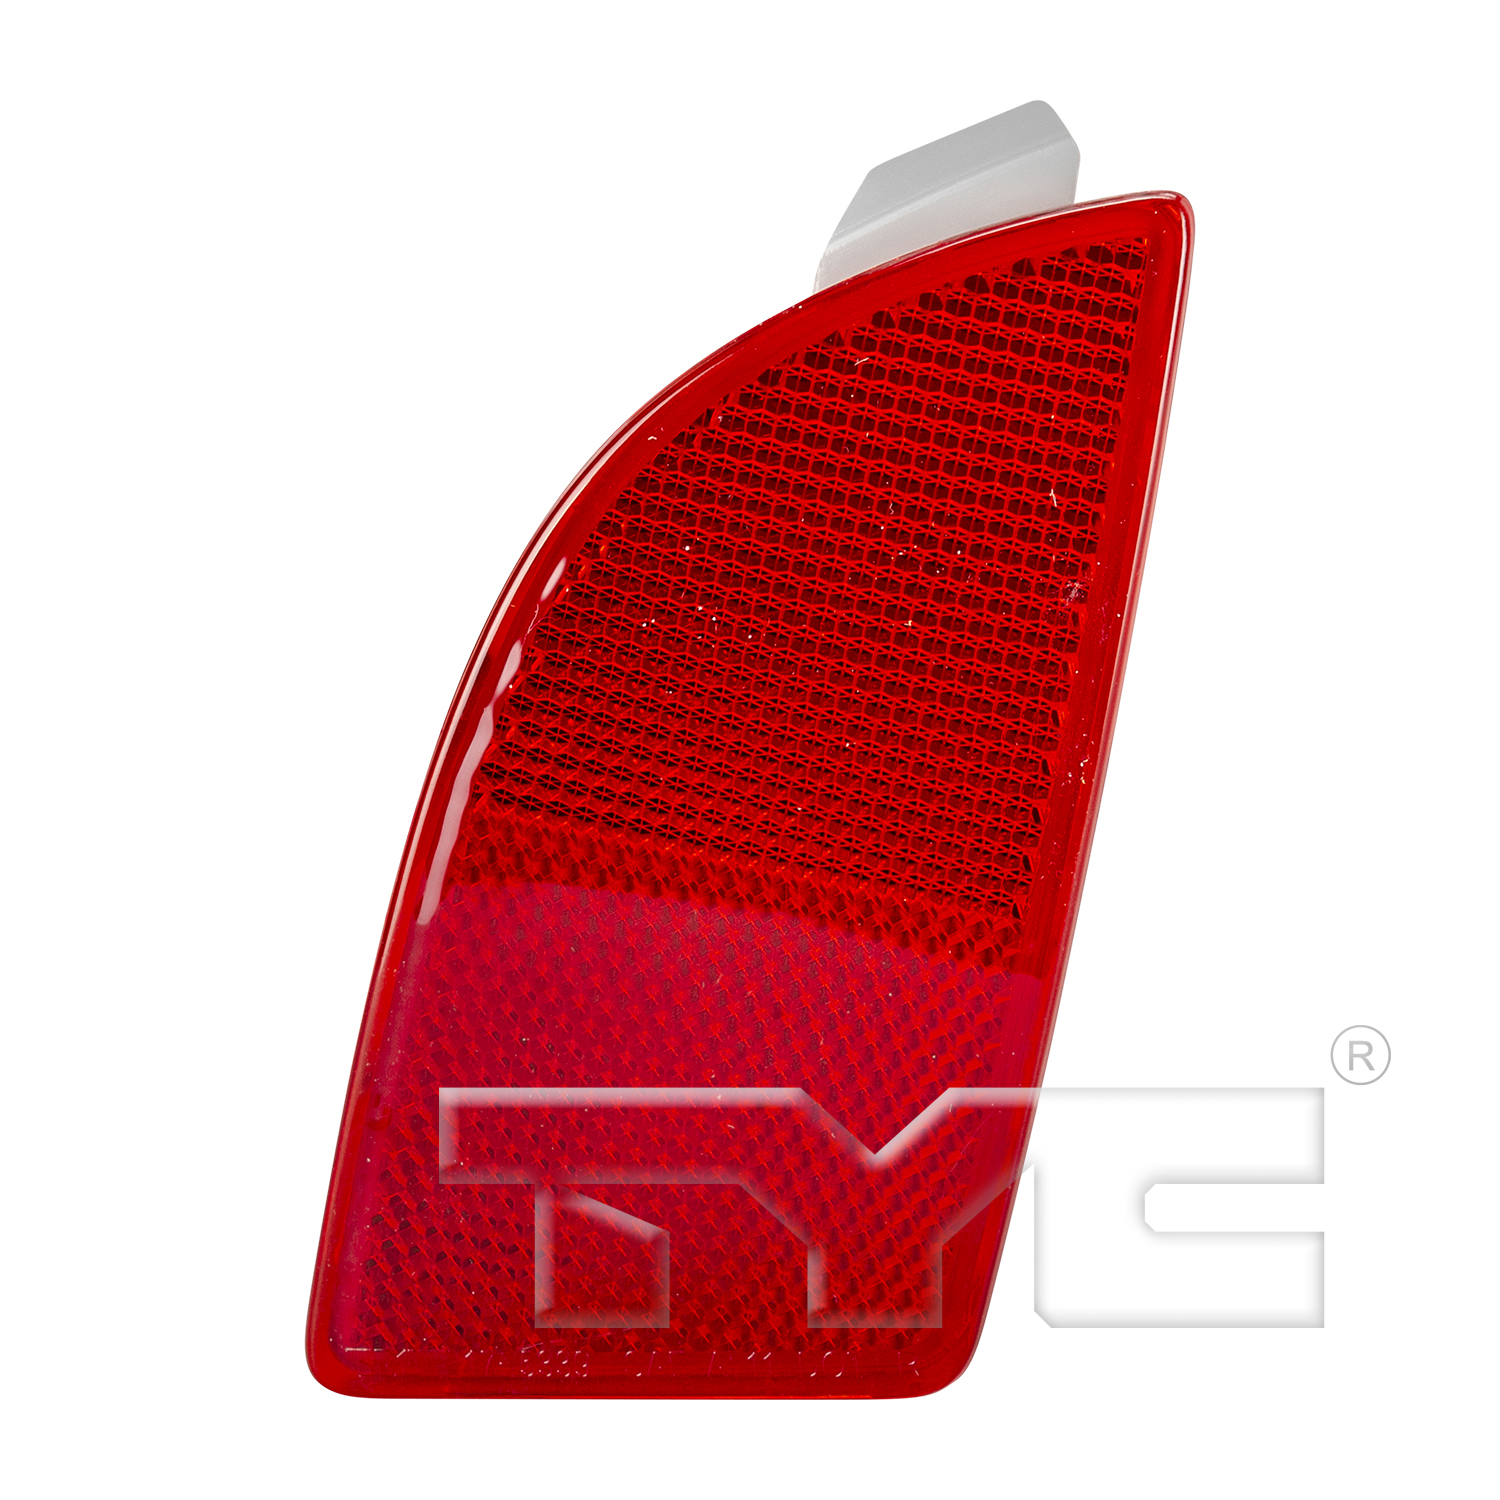 Aftermarket LAMPS for MAZDA - 2, 2,11-14,RT Rear bumper reflector